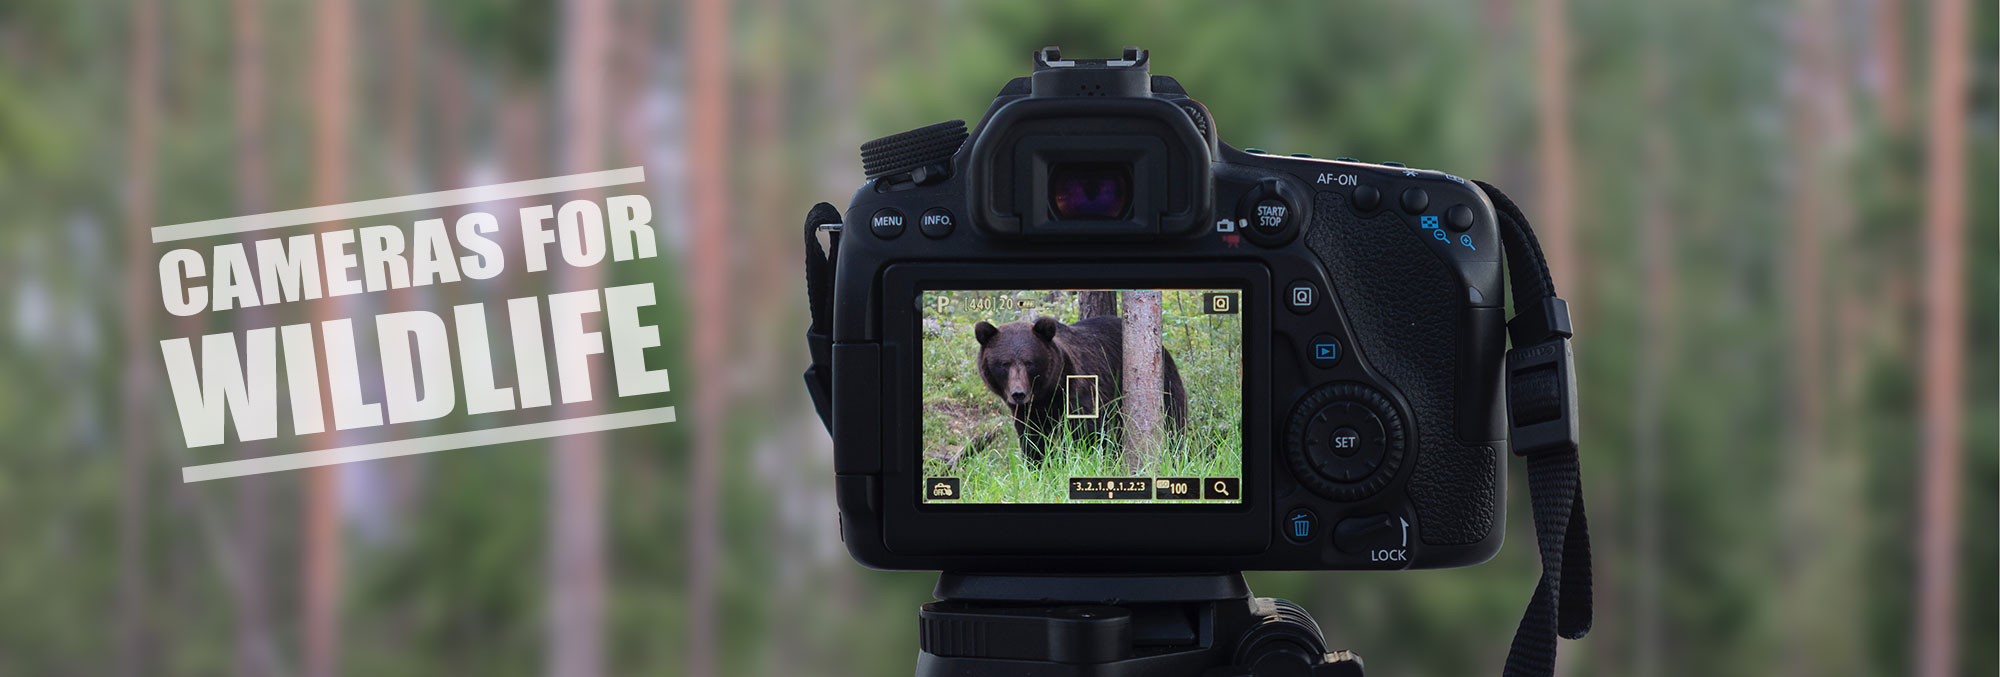 Best Camera for Wildlife Photography - Reviews and Guide